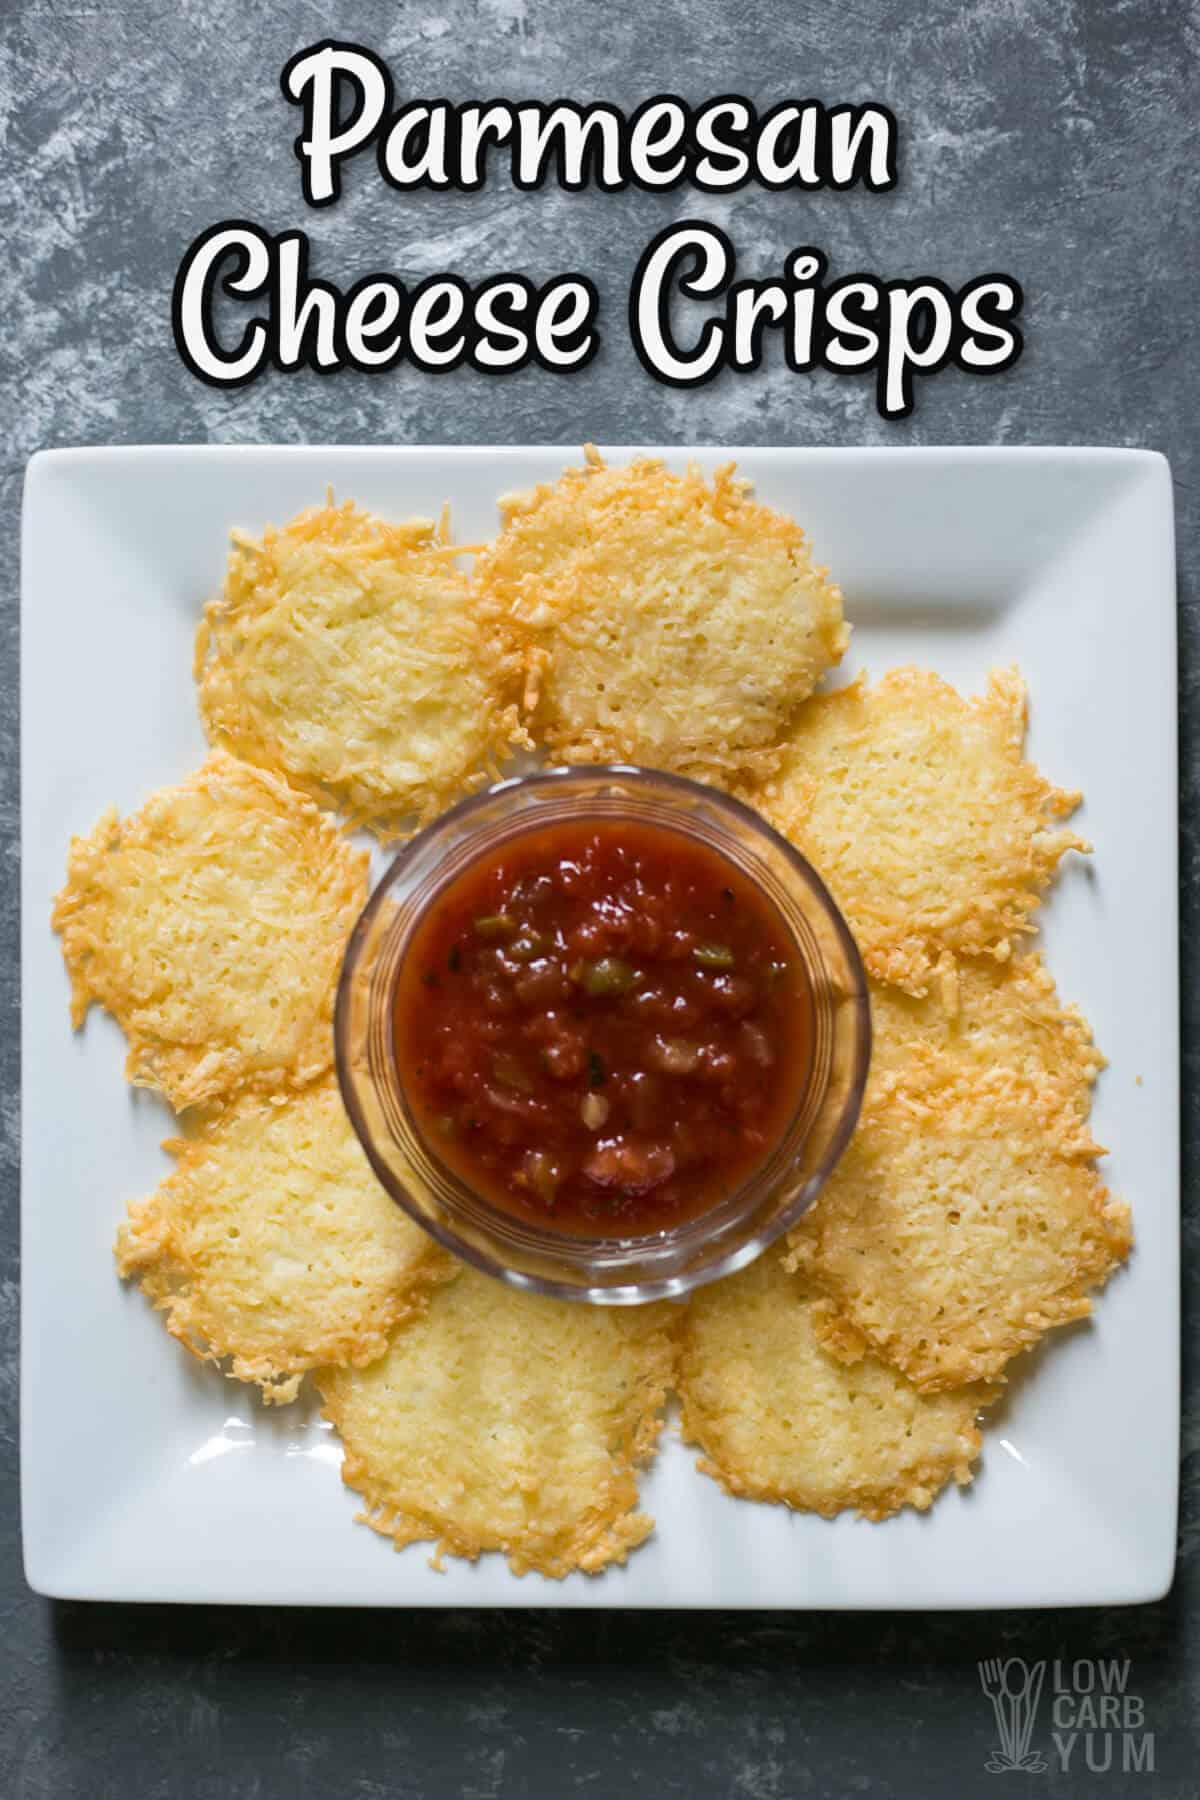 Keto Cheese Crisps: The Perfect Low-Carb, Crunchy Snack